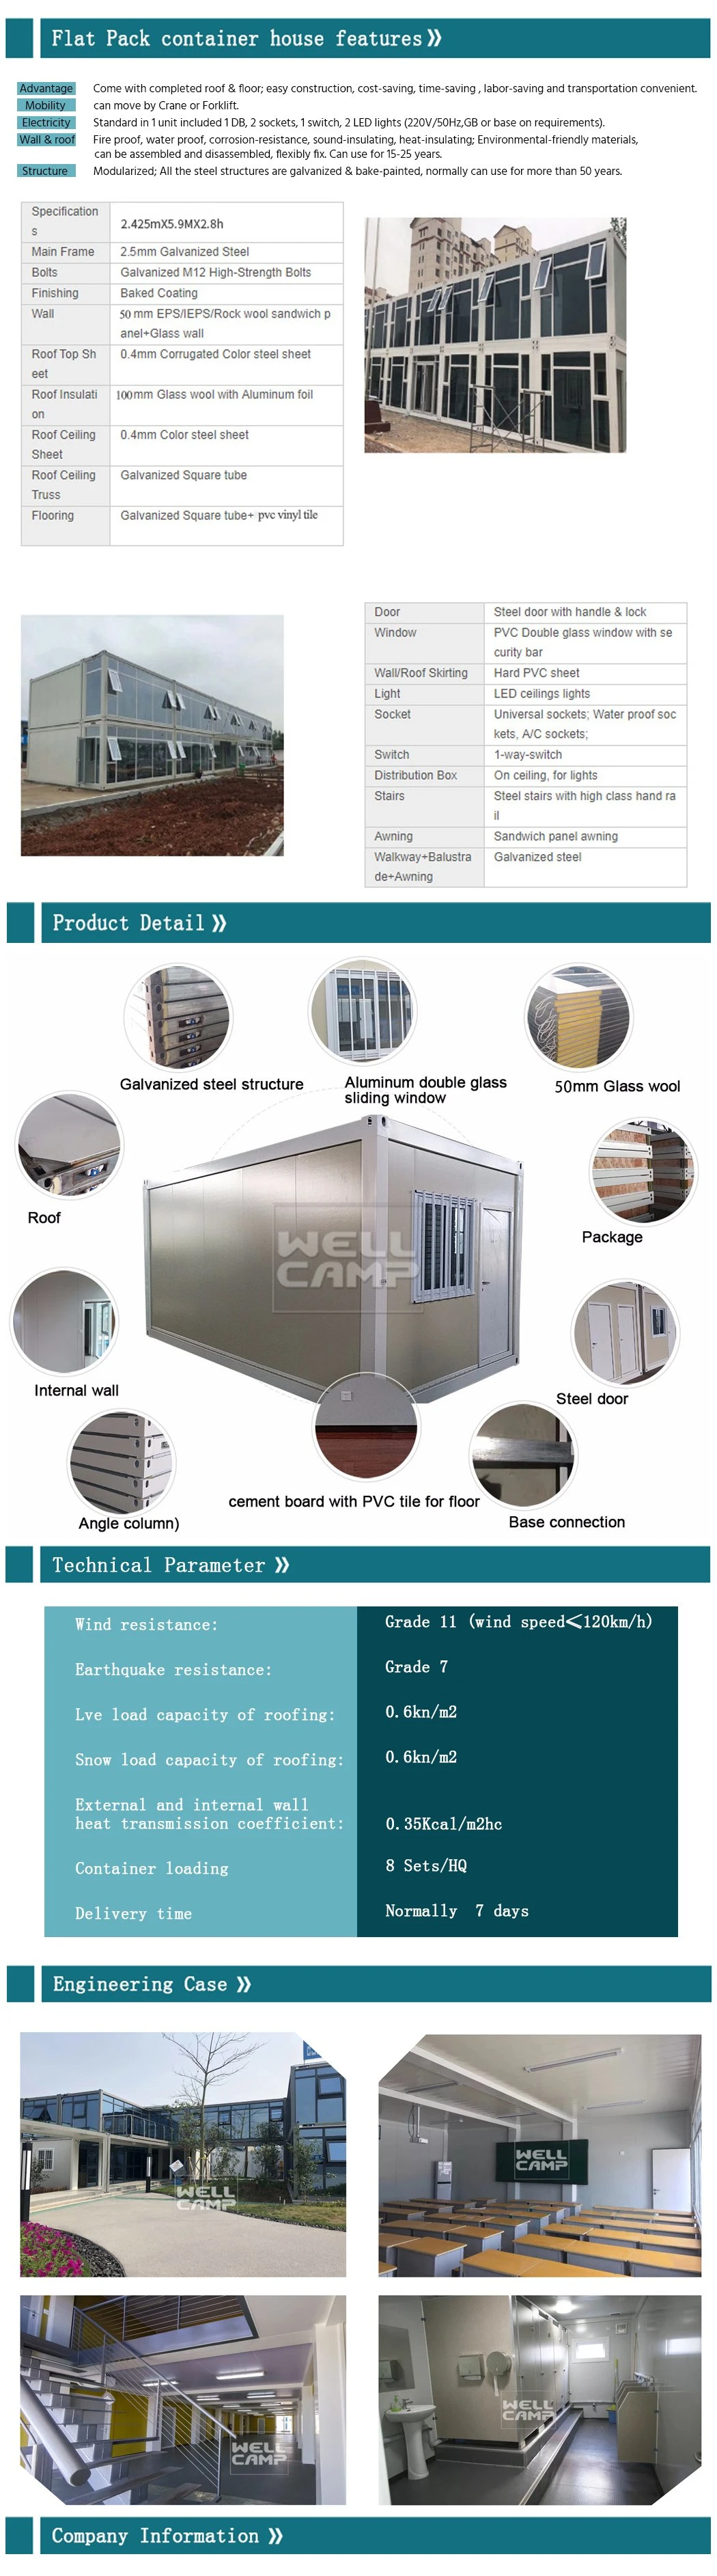 Economic Fast Build Prefabricated Dormitory Building Moveable Mobile Container Dorm Site Container Dormitory Office